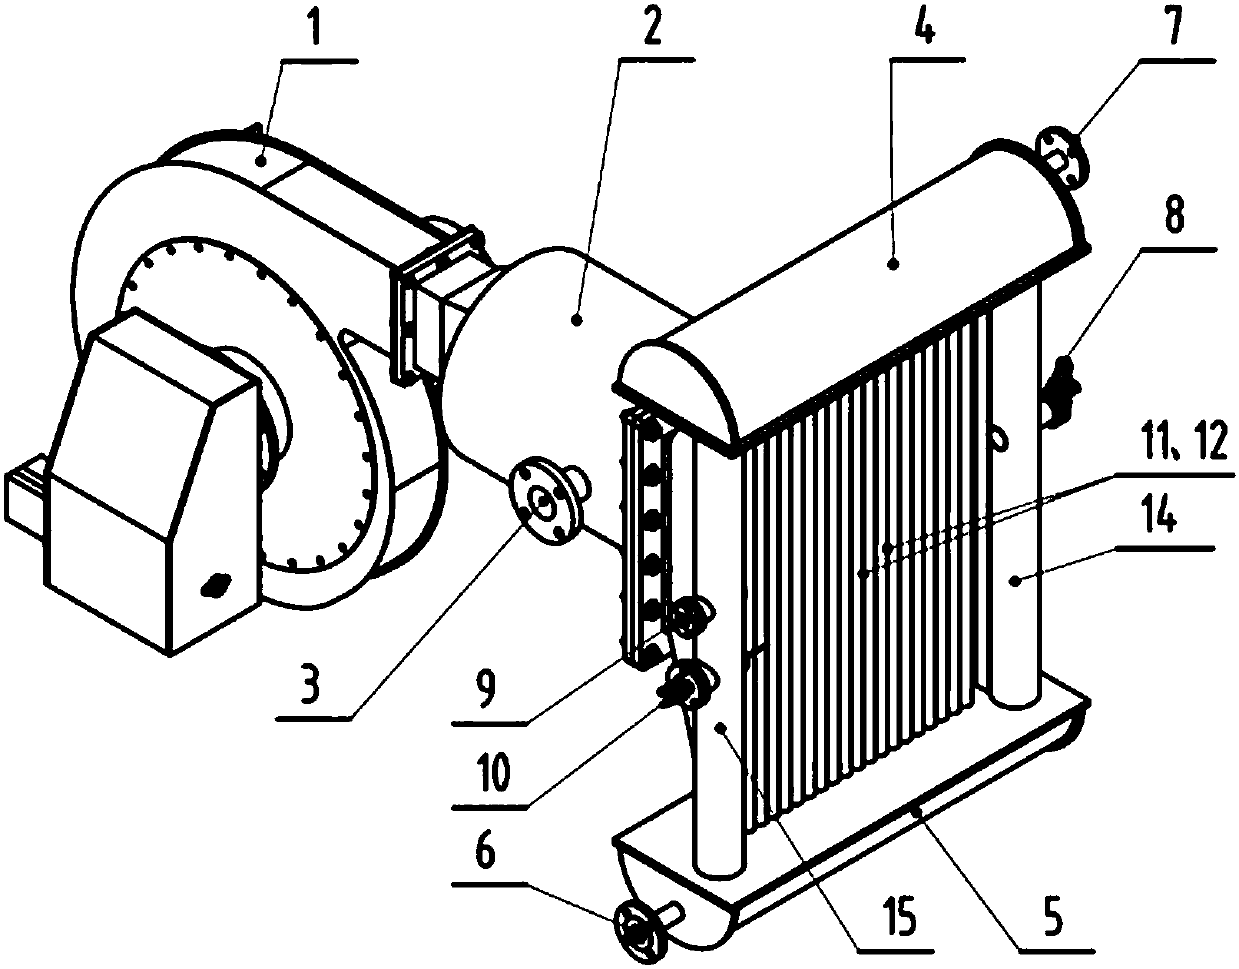 Burner of slotted type flame combustion device